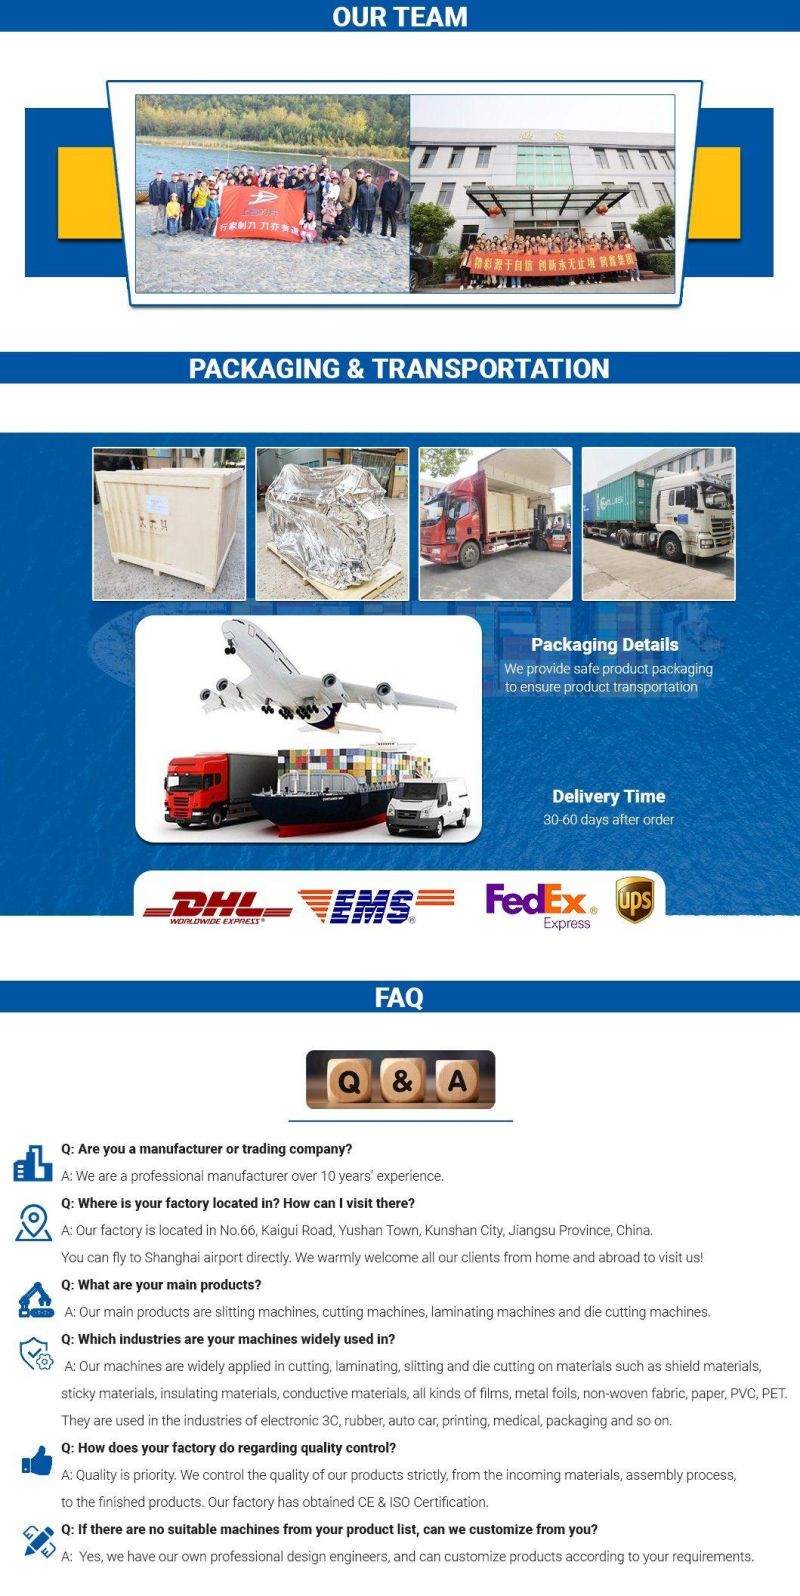 Insulating Materials Dust-Proof Material Hexin Price Plate Die Cutting Machine